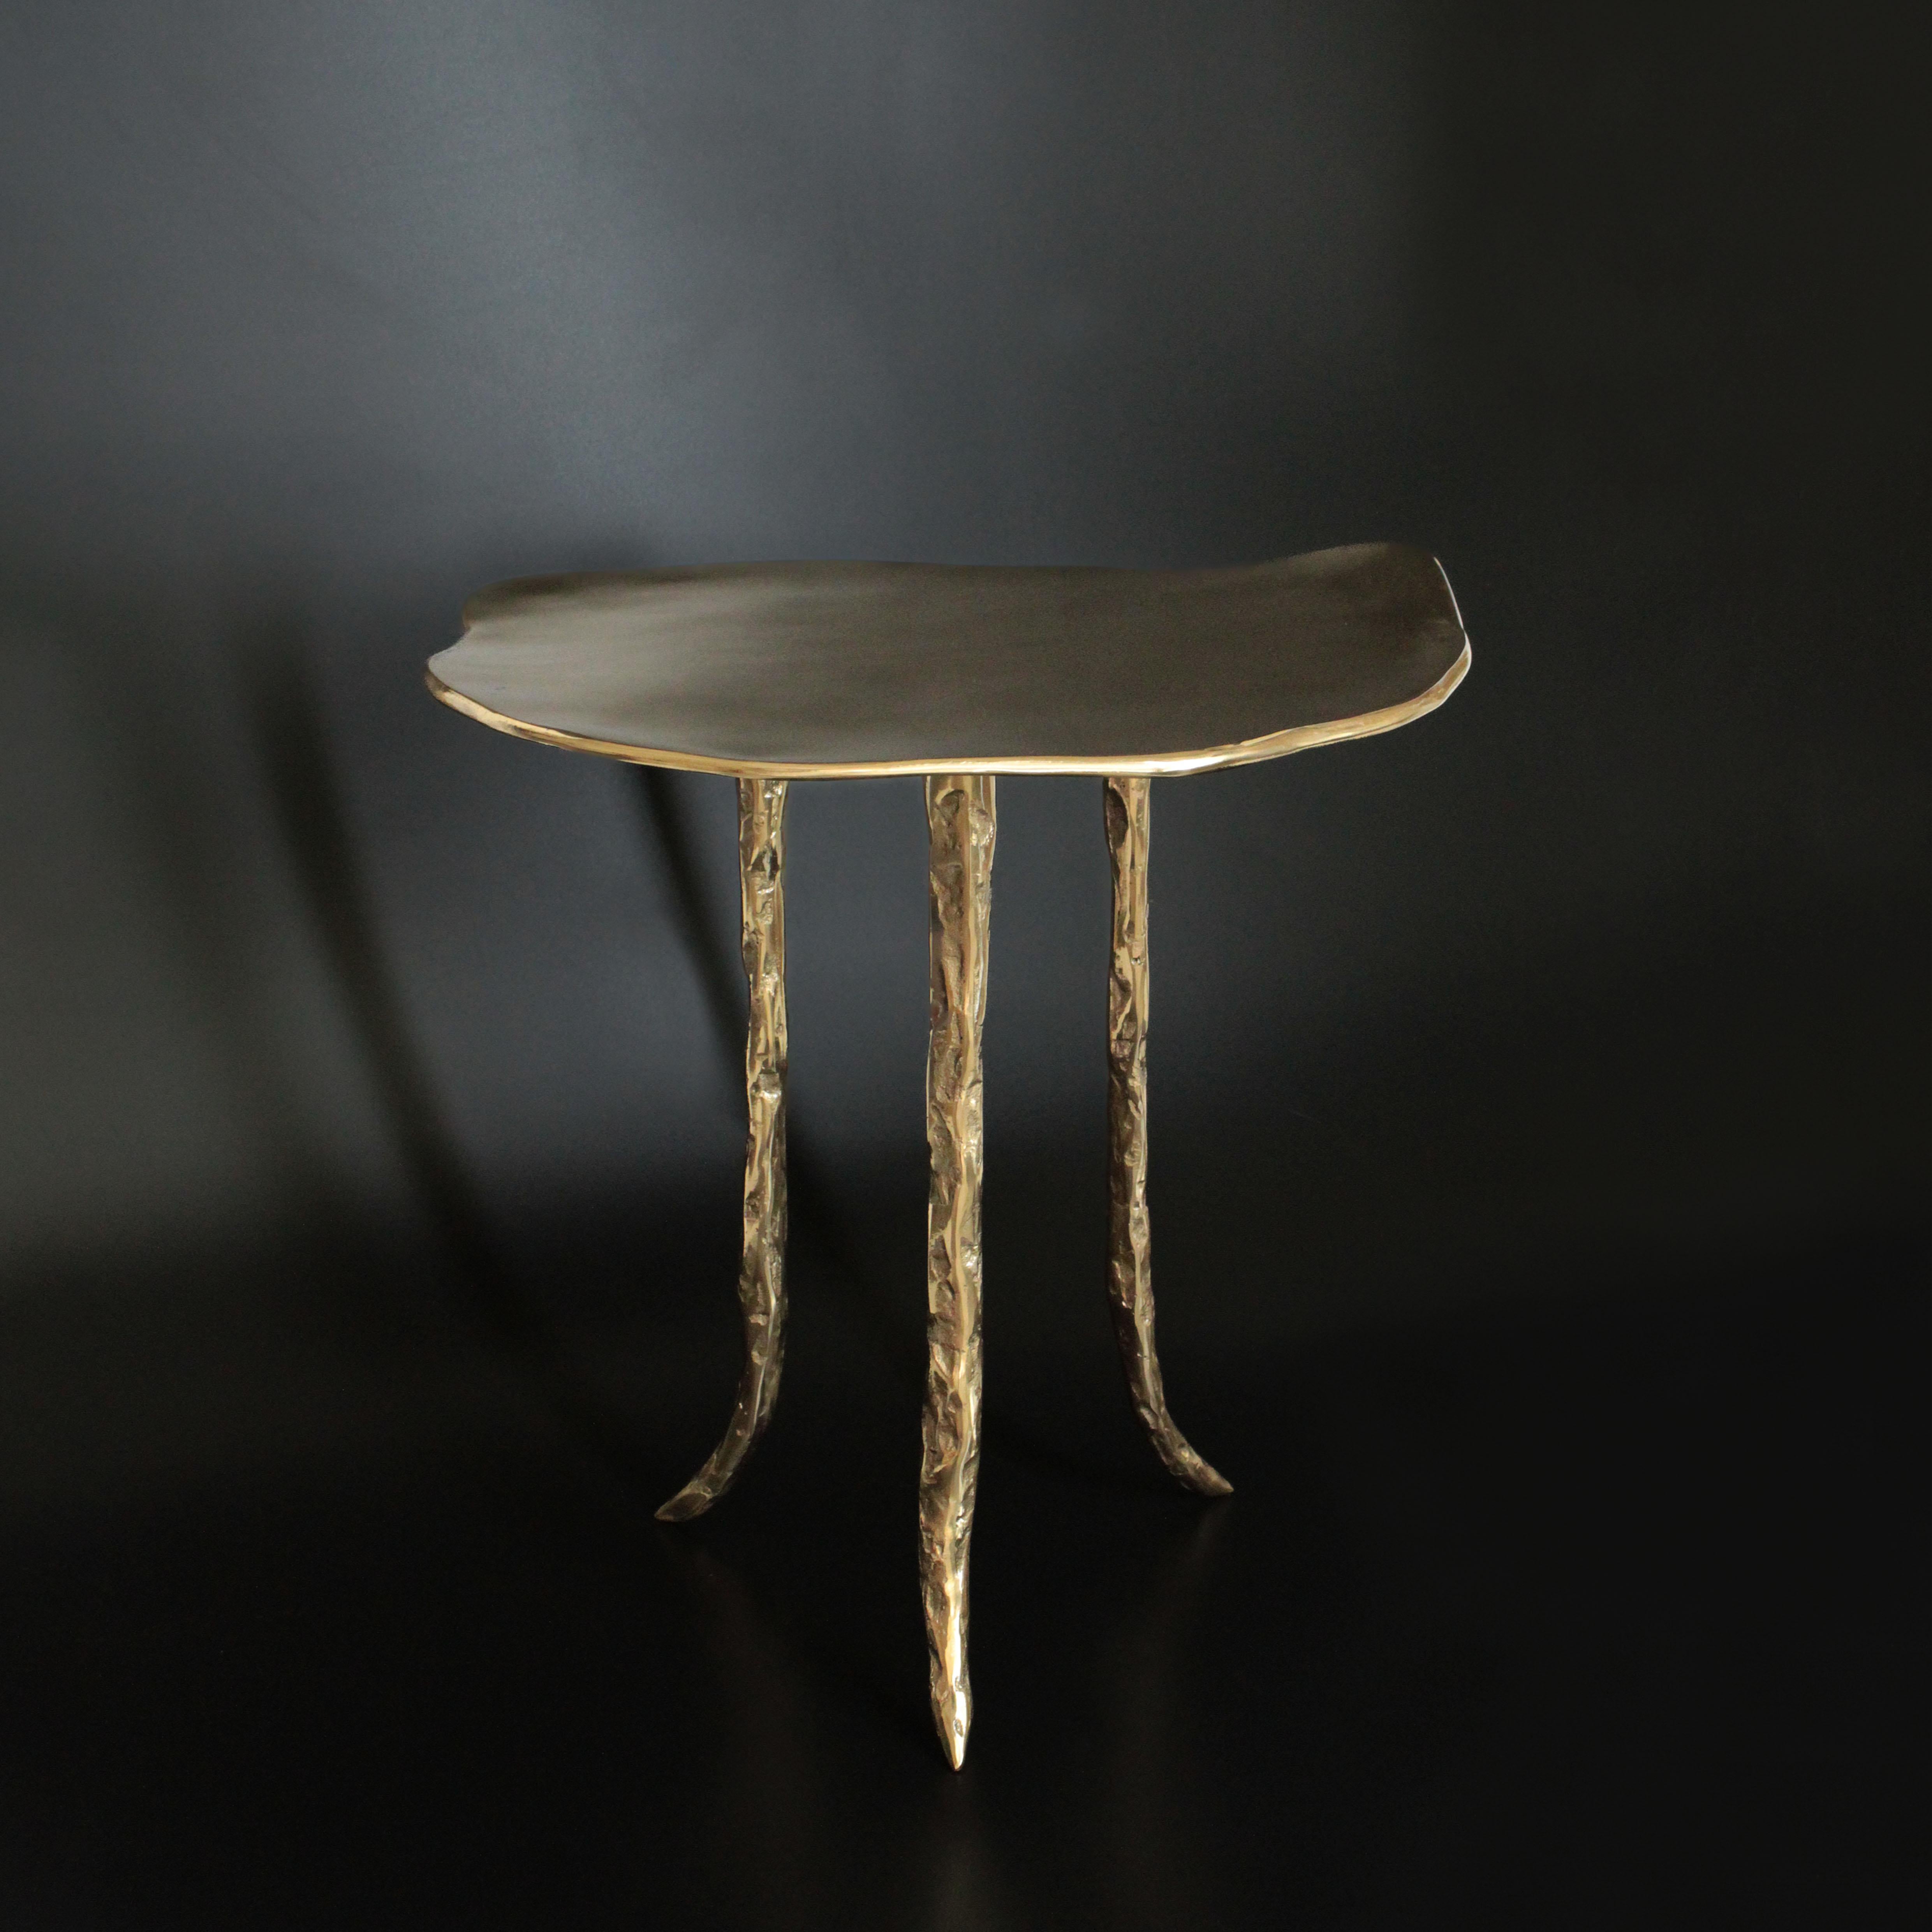 With their curved and sculptural structures, Onda Tables are designed with quality and sturdiness in mind. Each piece is made entirely handmade from bronze material with meticulous artistry, together with our talented craftsmen.

In creating this